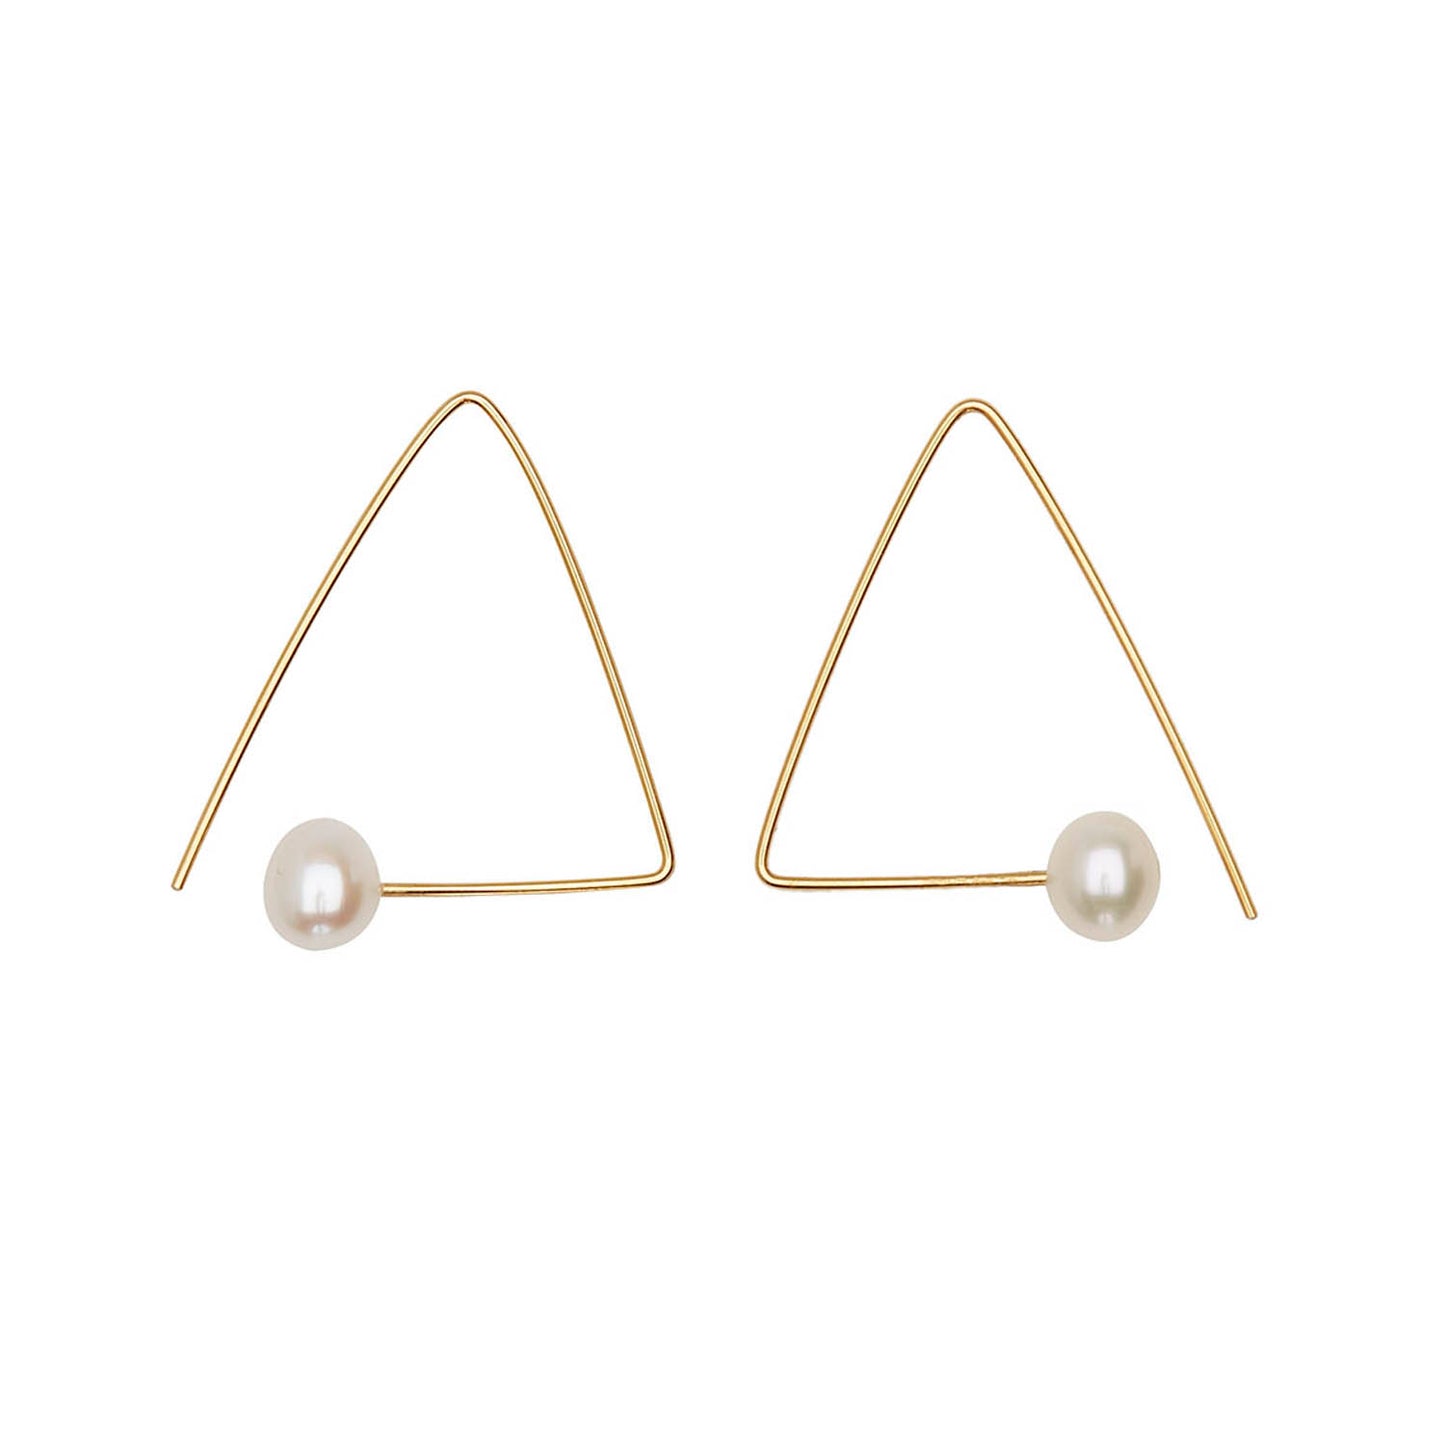 Petite Triangle Hoops with White Pearls